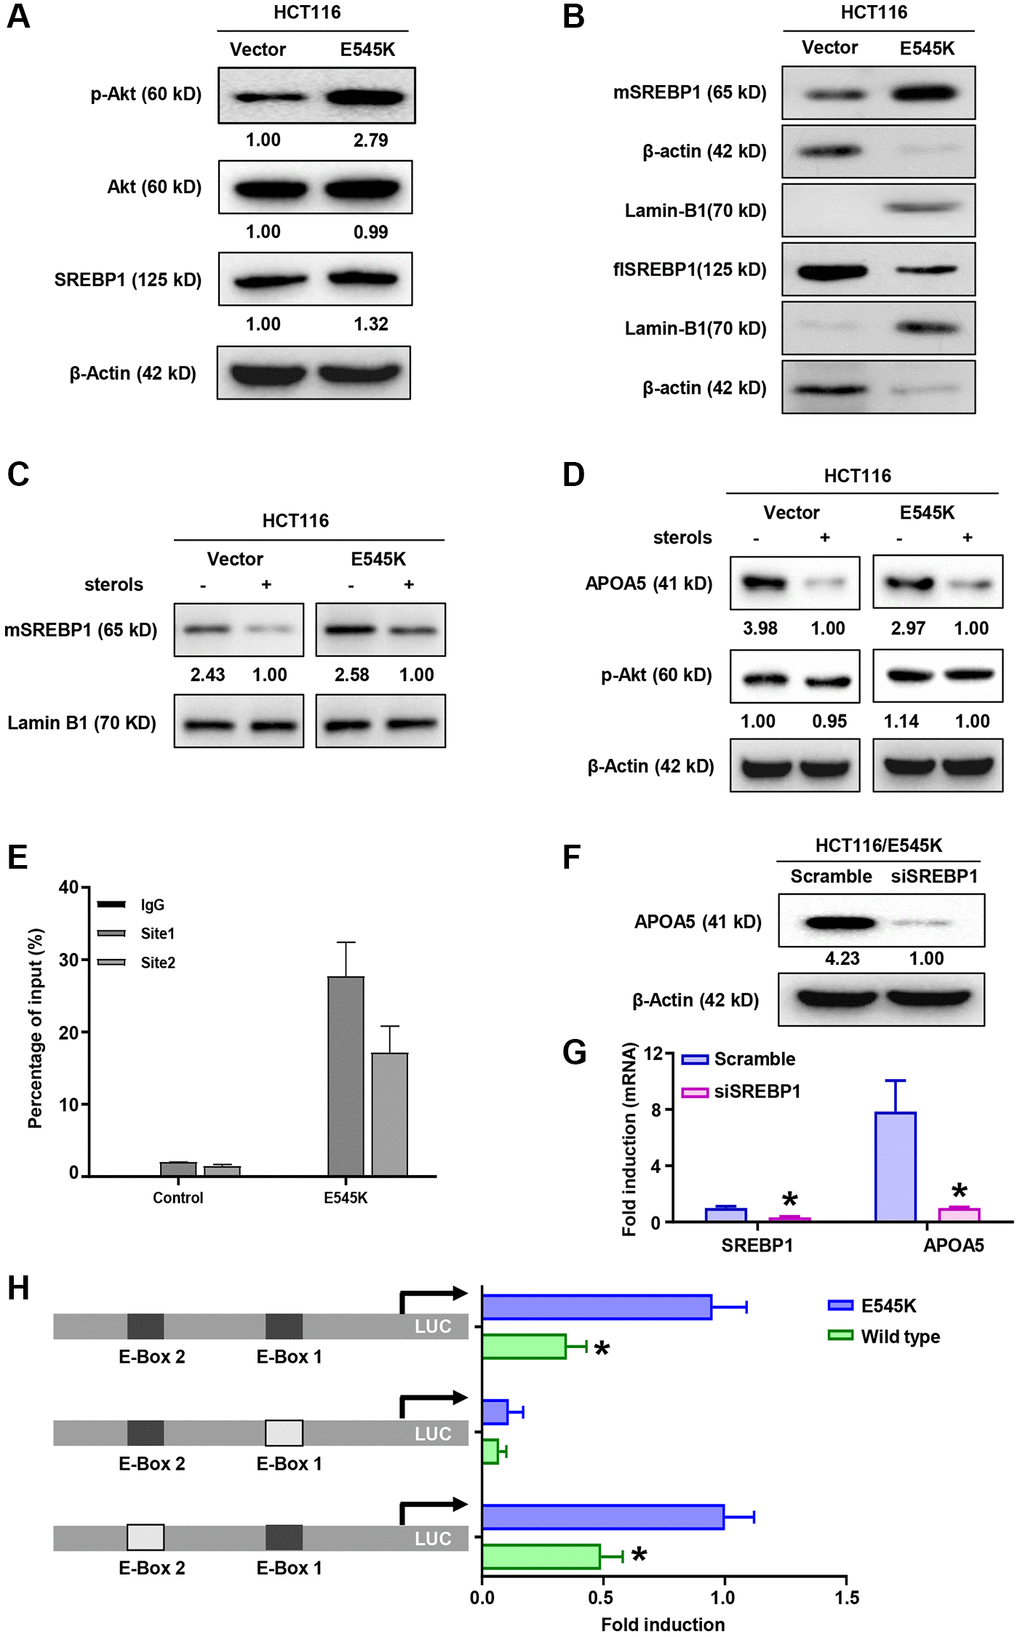 SREBP1 activation is necessary for APOA5 transcriptional regulation in PIK3CA mutant CRC cells. (A) The protein levels of Akt, p-Akt and SREBP1 were measured by Western blot assays in HCT-116 cells transfected with PIK3CA-E545K or vector plasmids. (B) Immunoblotting assays were performed with nuclear and cytoplasmic extracts from HCT116/Vector and HCT116/E545K cells, which showed increased mature SREBP1 (mSREBP1, 65 kD) and decreased full-length SREBP1 (flSREBP, 125 kD) in HCT116/E545K cells. (C) Transfected cells were cultured in the presence or absence of 1 mg/ml 25-hydroxycholesterol (sterols) for 2 hours, and nuclear extracts were analyzed for expression of mSREBP1. (D) Whole cell lysates of sterols treated cells were analyzed for expression of APOA5 and p-Akt. (E) ChIP-PCR assays were performed to access the binding between SREBP1 and APOA5 promoter. (F) SREBP1 knockdown was performed with siRNA transfection. APOA5 protein levels were quantified 72 hours after cell infection. (G) The mRNA levels of SREBP1 and APOA5 were quantified by real time PCR. (H) Transfected HCT116 cells were further infected with luciferase (LUC) reporter constructs which contains a wild type or mutant APOA5 promoter fragment as shown. Luciferase activity was measured and compared between different groups. Results are representative of at least three independent experiments. p-values *.